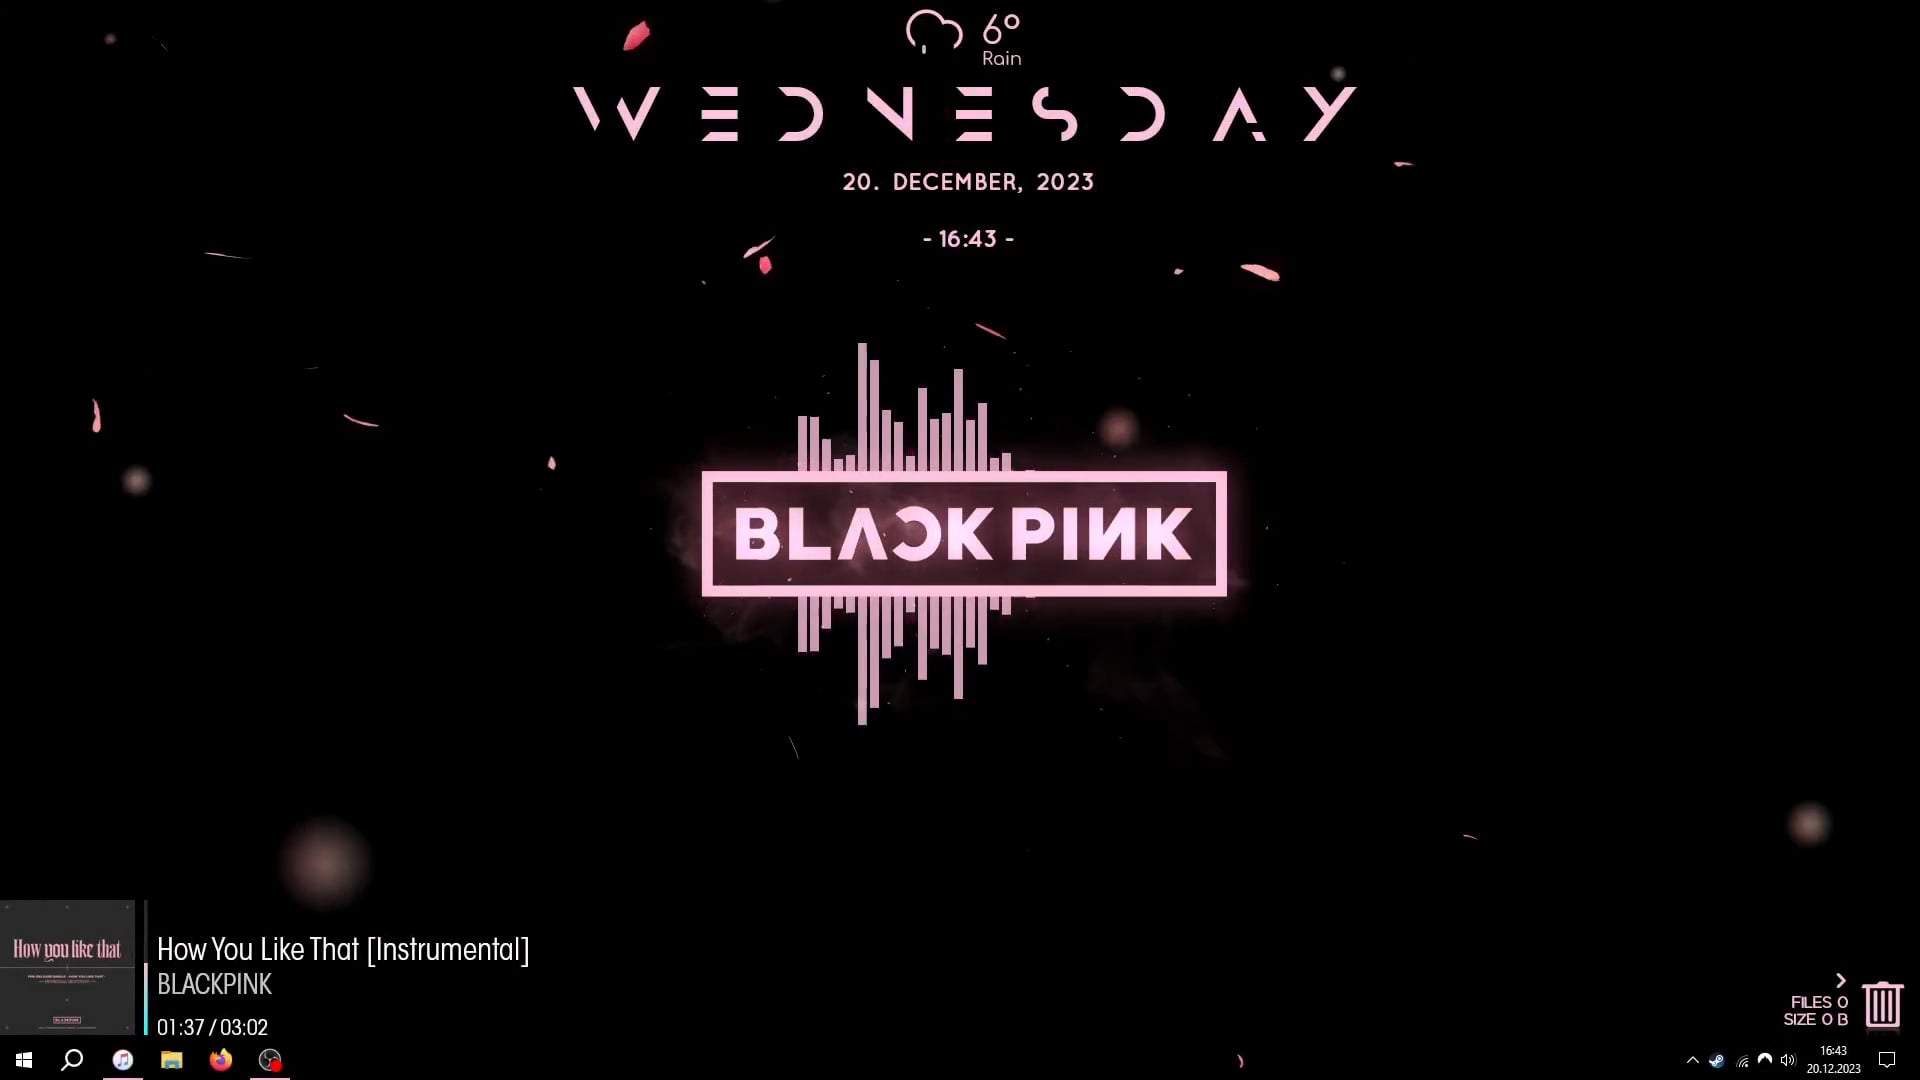 I finally took some time to create a clean looking Desktop with audio visualization for my PC. Turned out to be Blackpink themed (of course ^^). Credit to the art of all 'Rainmeter' and 'Wallpaper Engine' creators, which I used and adjusted a bit to fit the Blackpink theme.